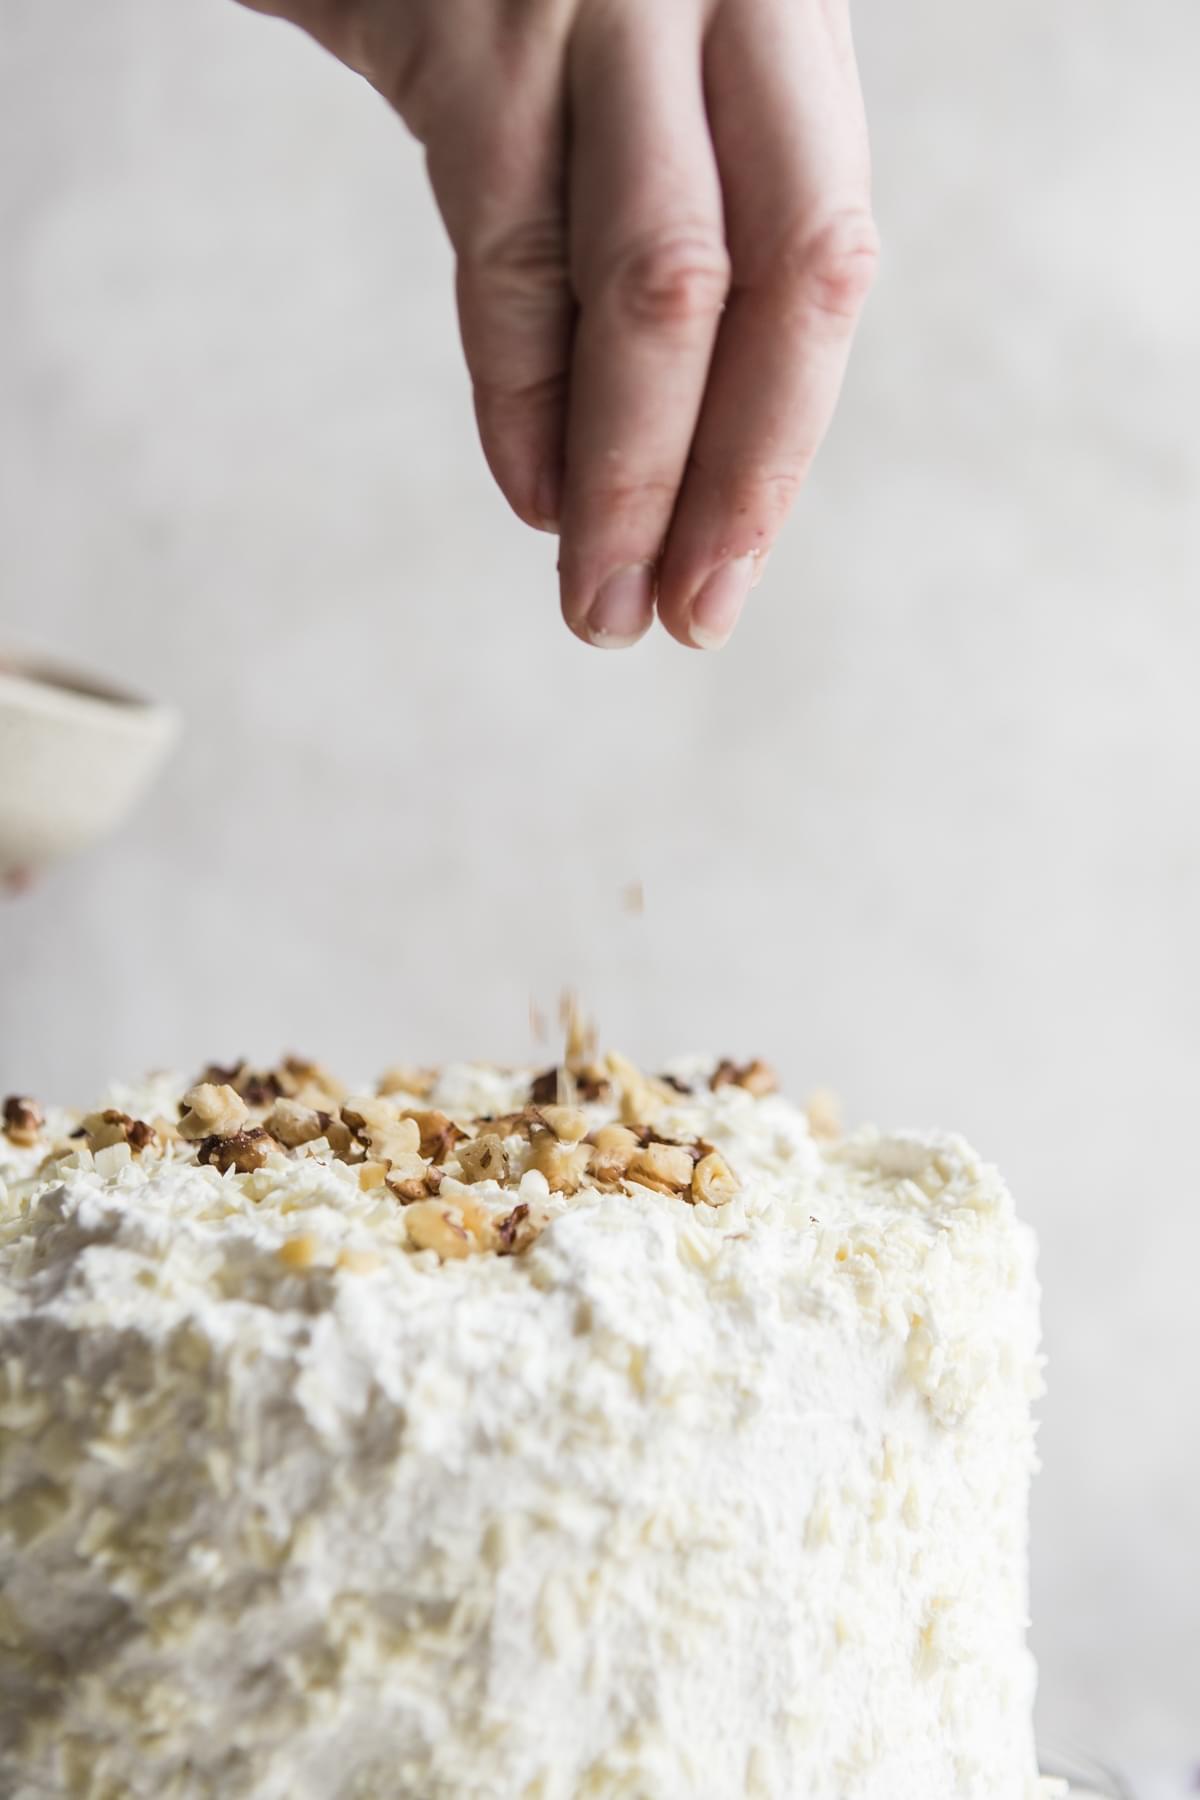 hand sprinkling walnuts over a homemade banana cake with whip cream frosting